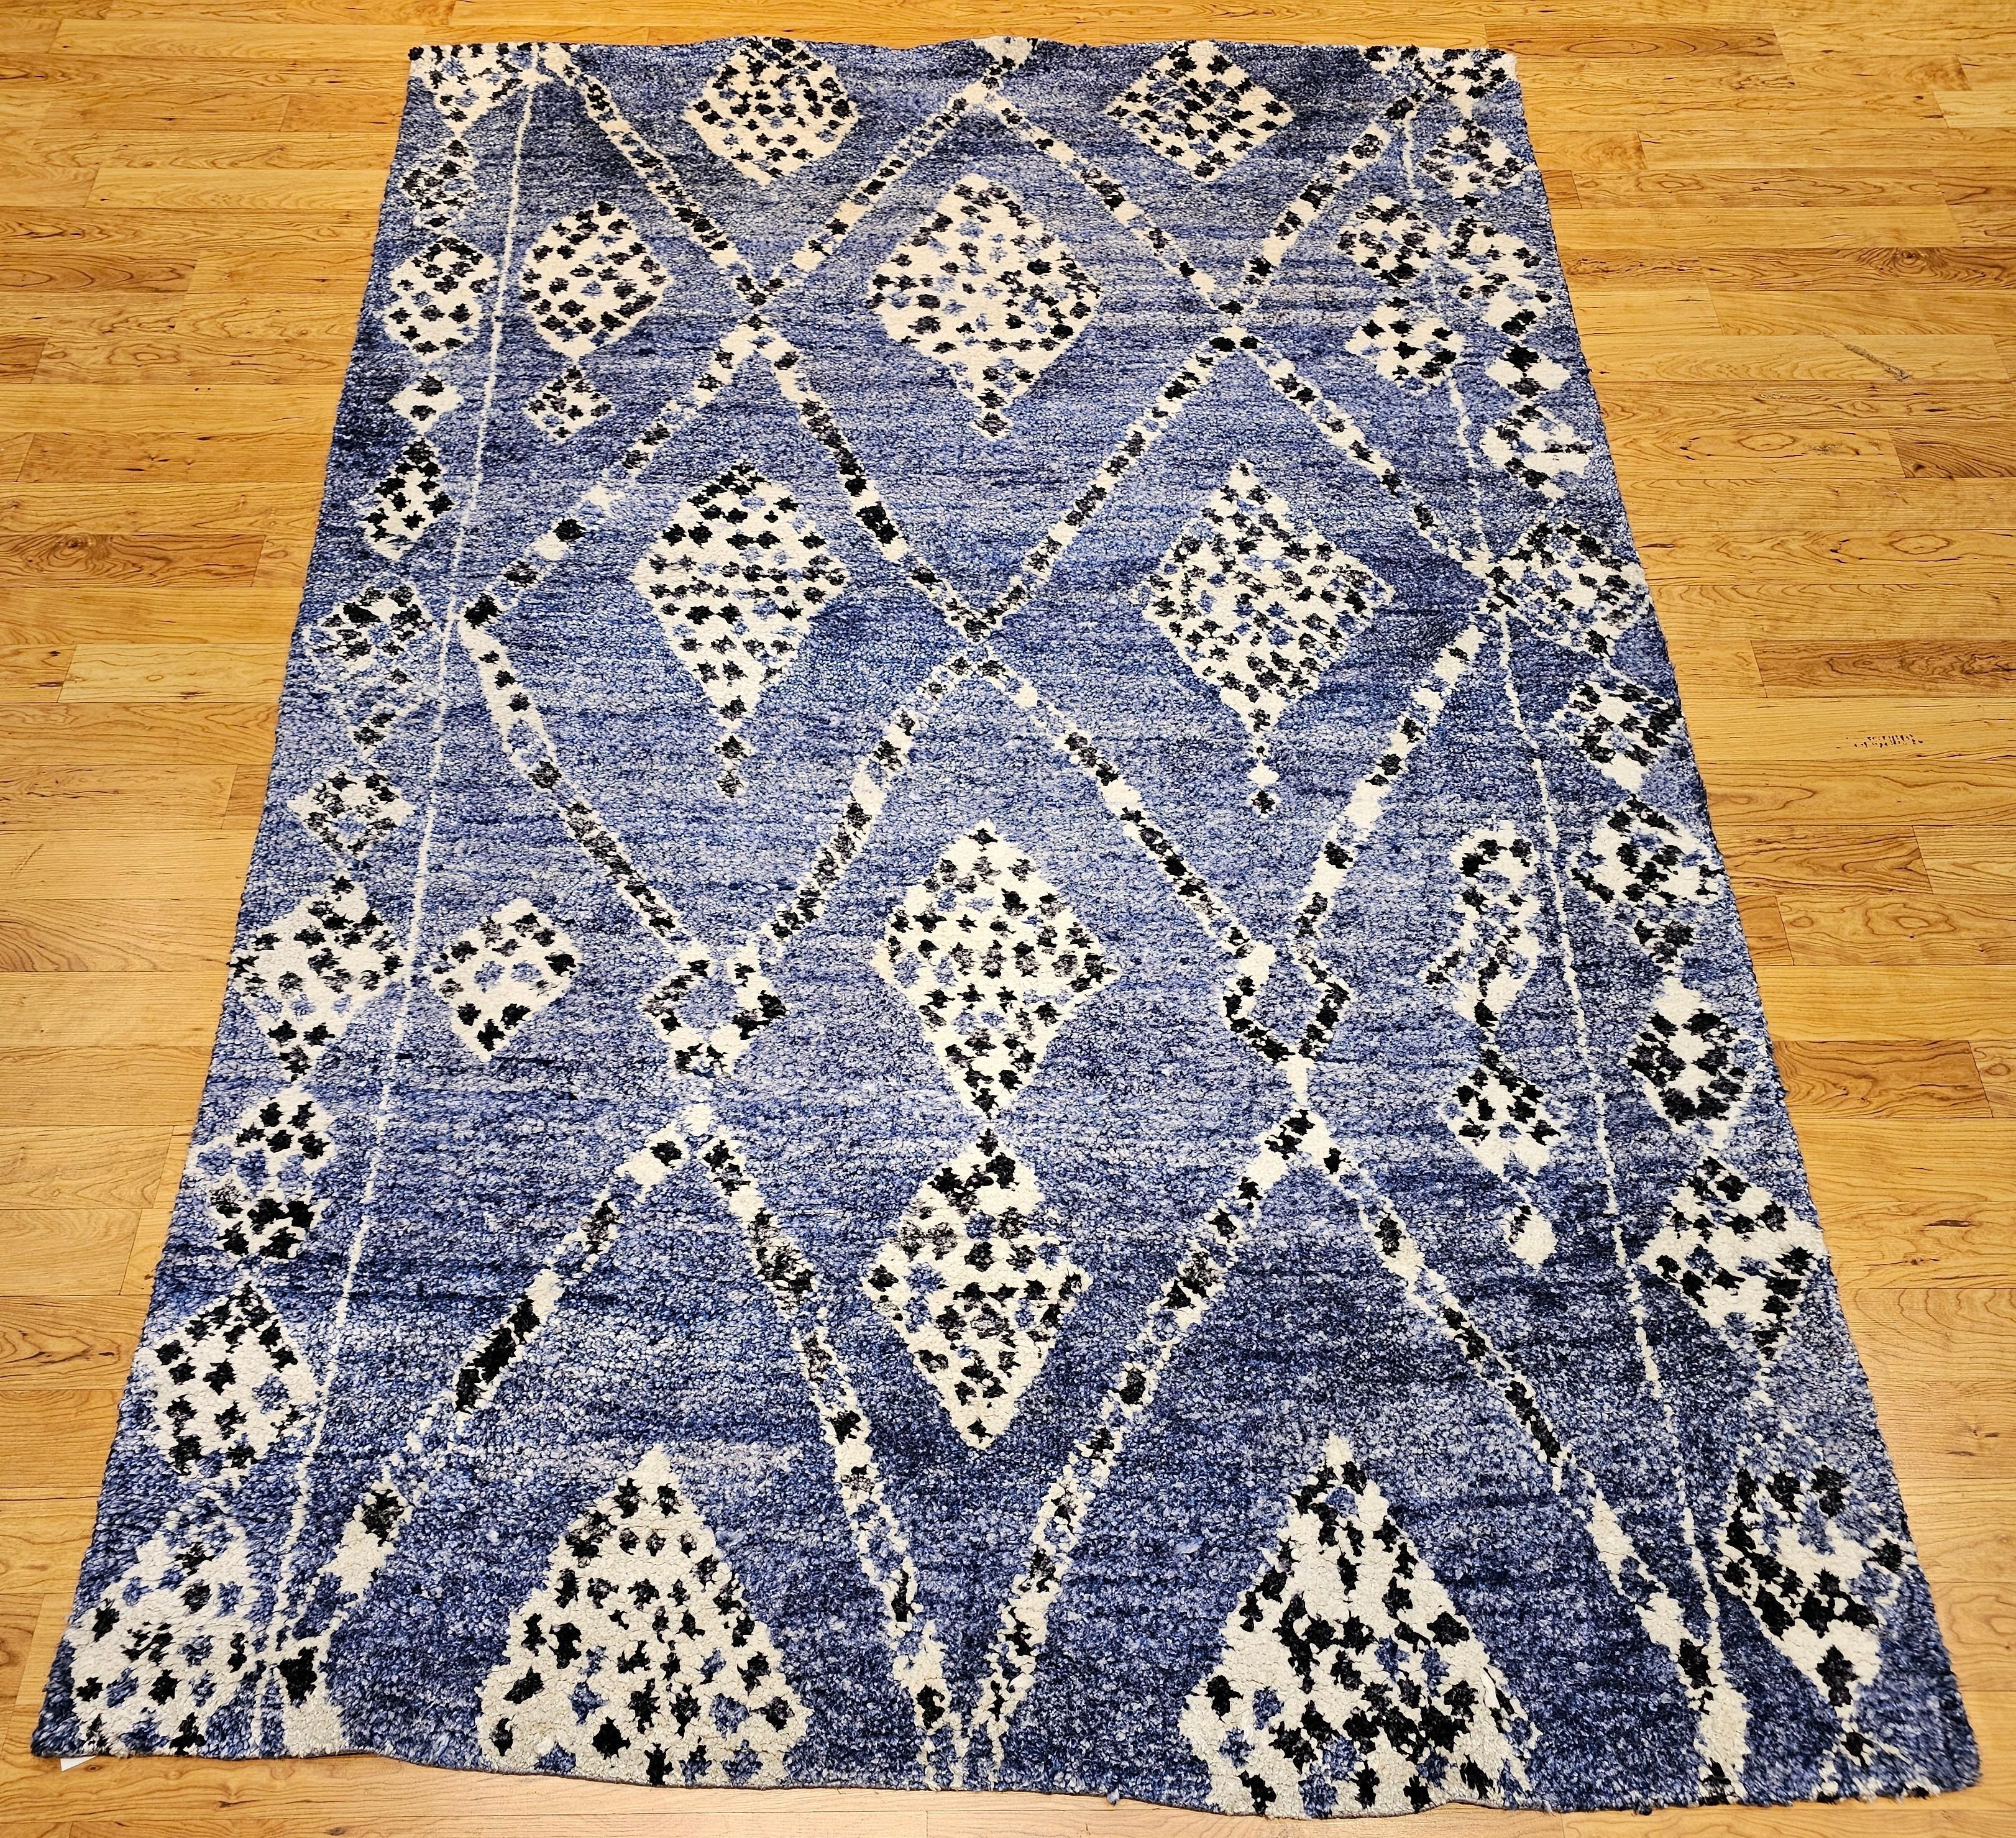 Vintage Moroccan rug in an all over geometric pattern in pale indigo, navy and ivory colors.  The pale indigo is truly a wonderful shade of blue that has variation throughout the field that adds to the beauty of this room size or area rug.  The rug